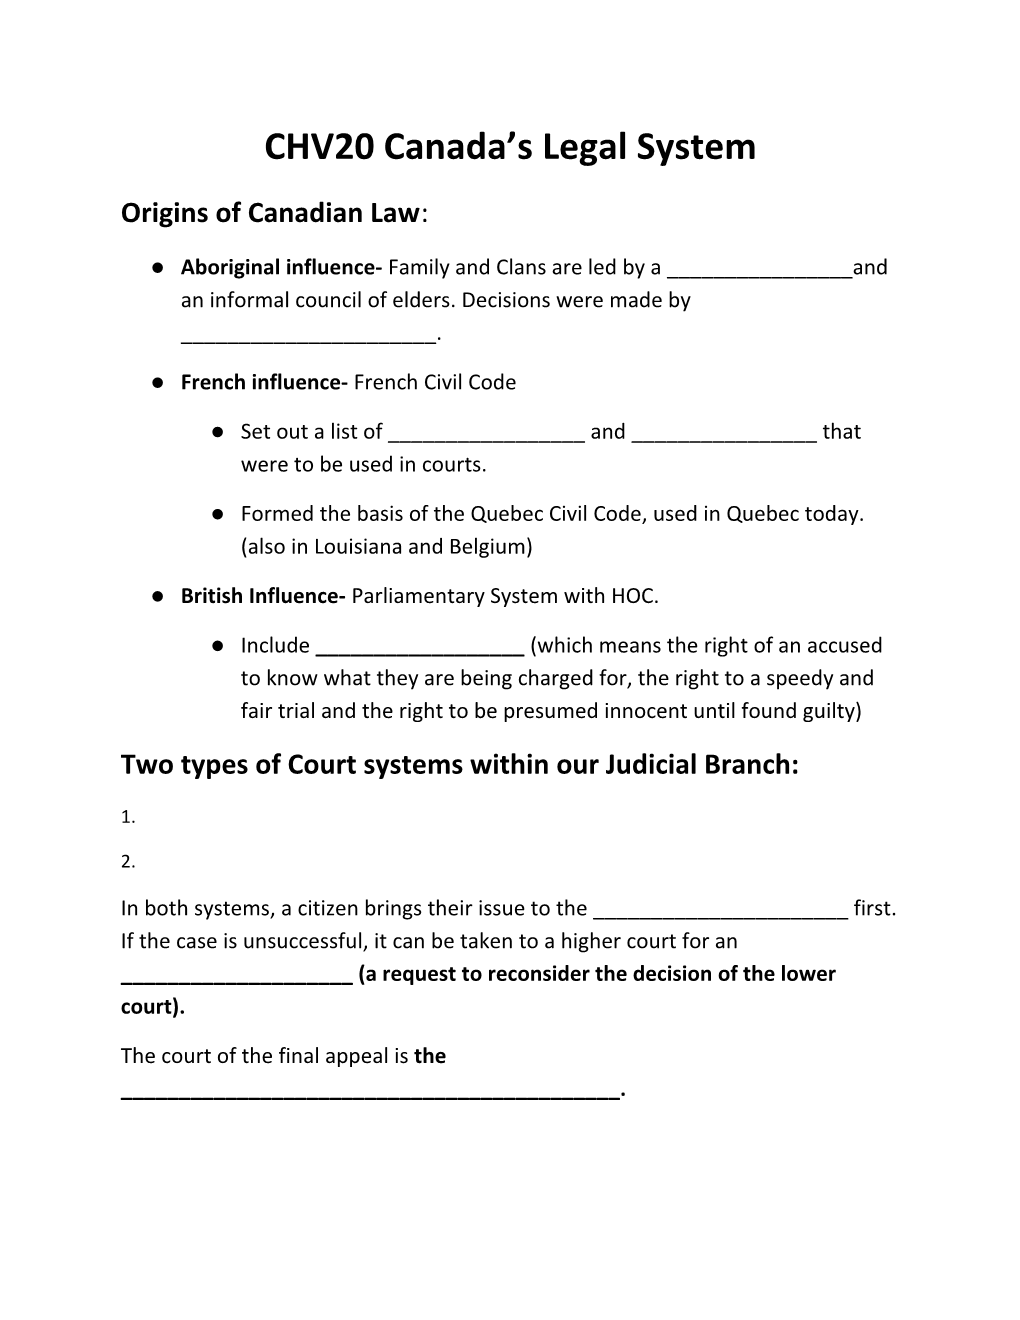 CHV20 Canada S Legal System